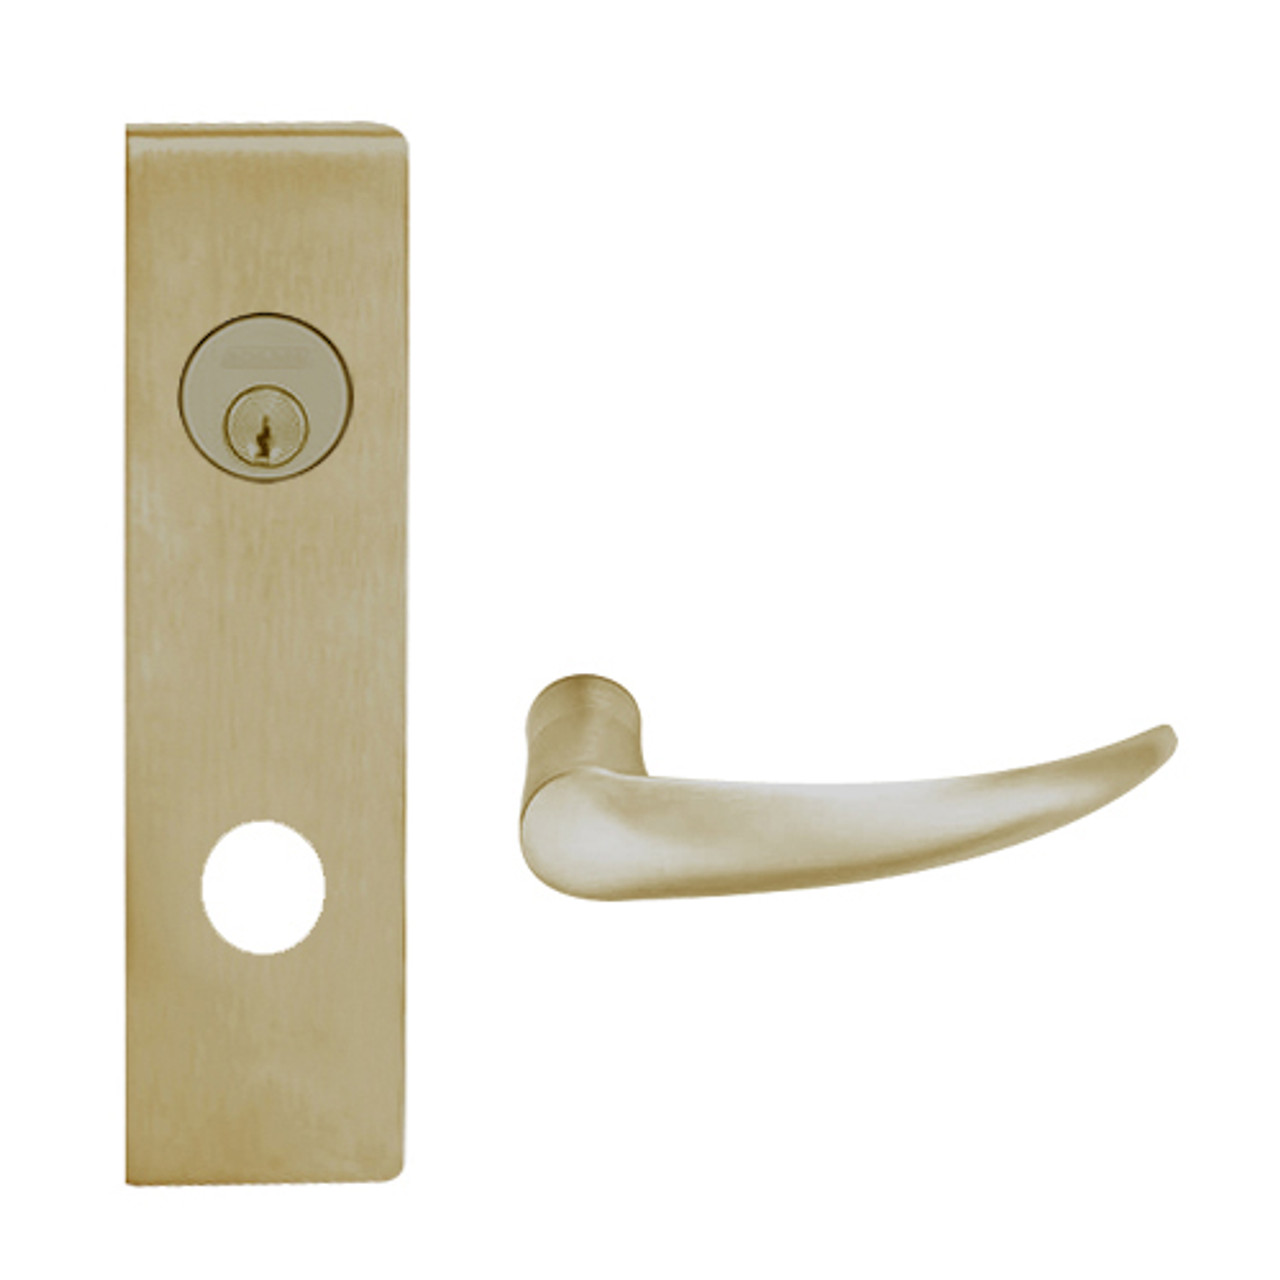 L9050P-OME-N-619 Schlage L Series Entrance Commercial Mortise Lock with Omega Lever Design in Satin Nickel